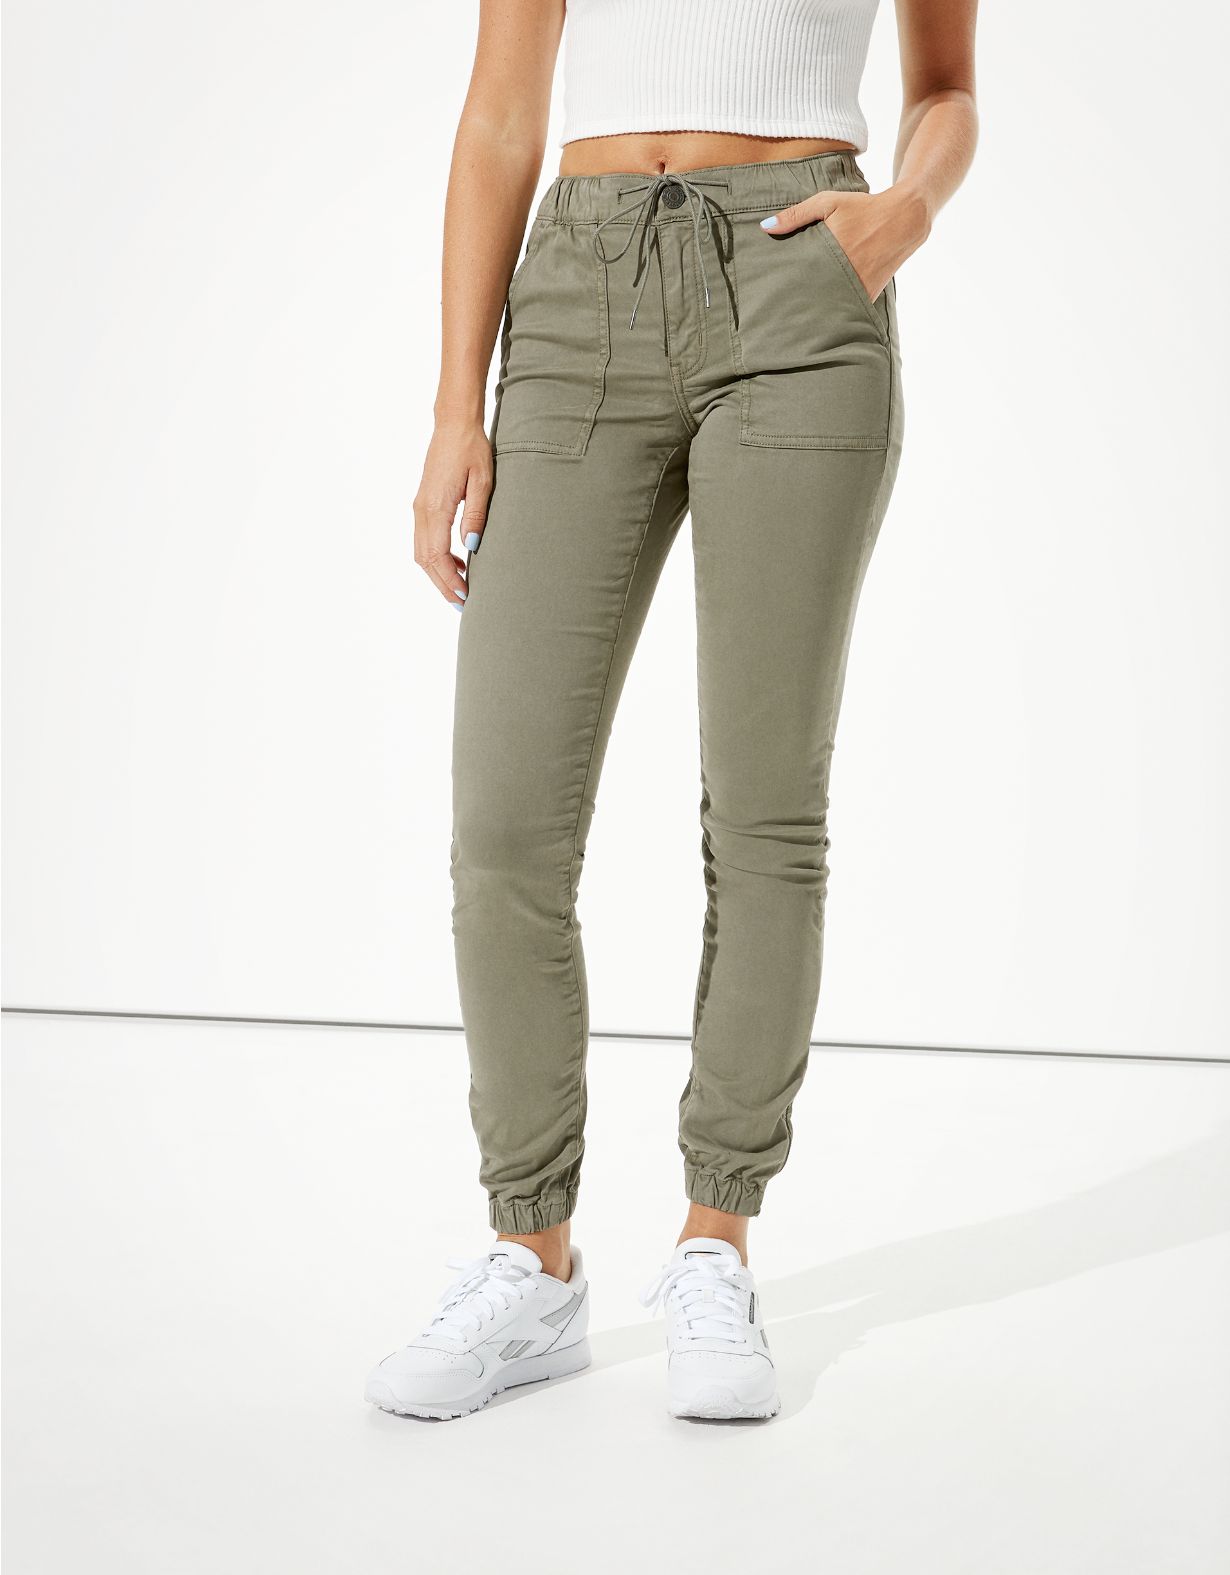 AE High-Waisted Jegging Jogger